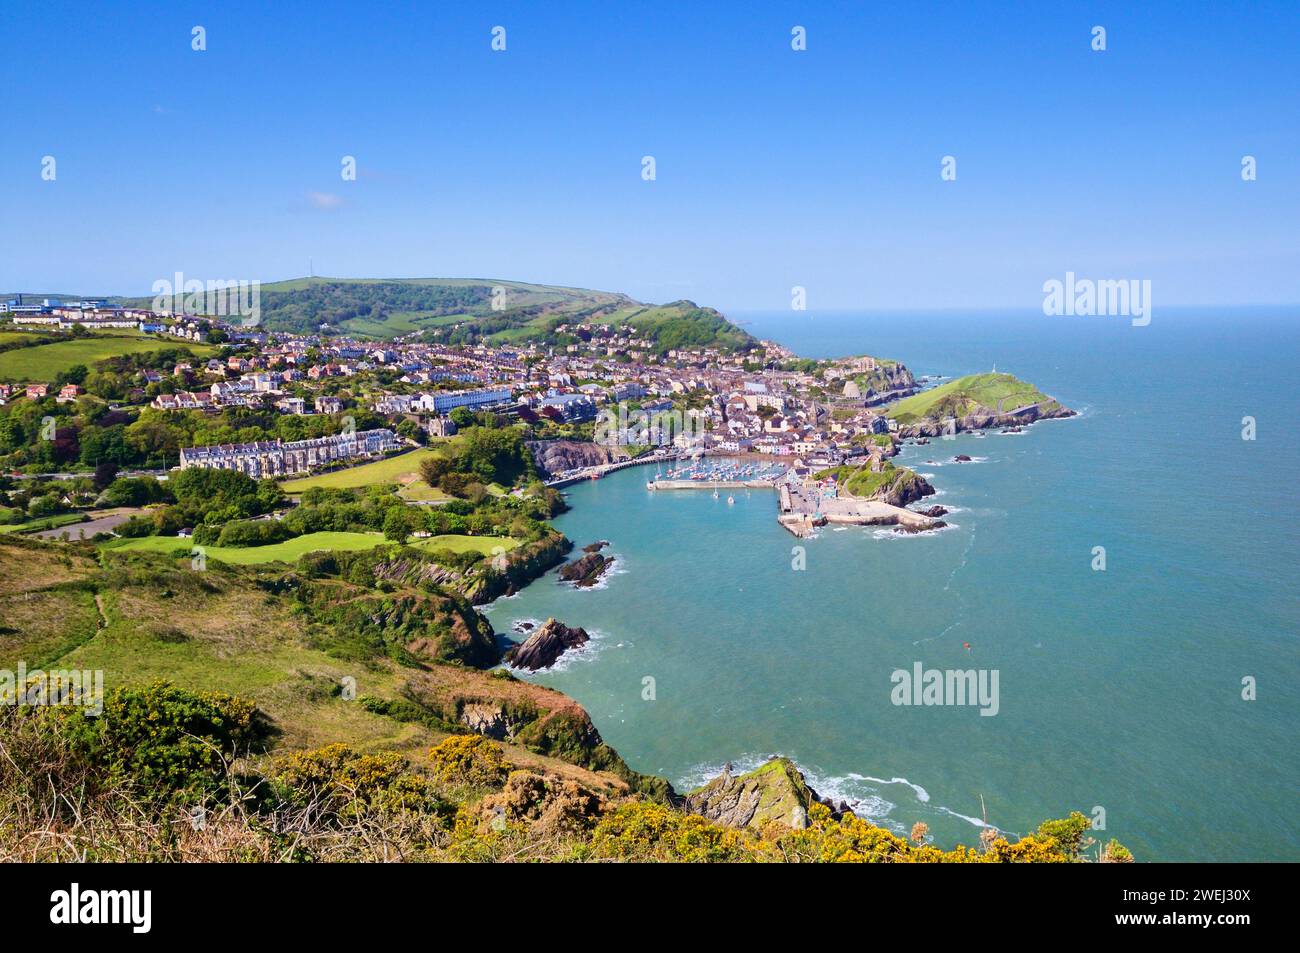 Sunny sea view of Ilfracombe town and coastline from cliff at Hillsborough Park Nature Reserve on the South West Coast Path, North Devon, England, UK Stock Photo